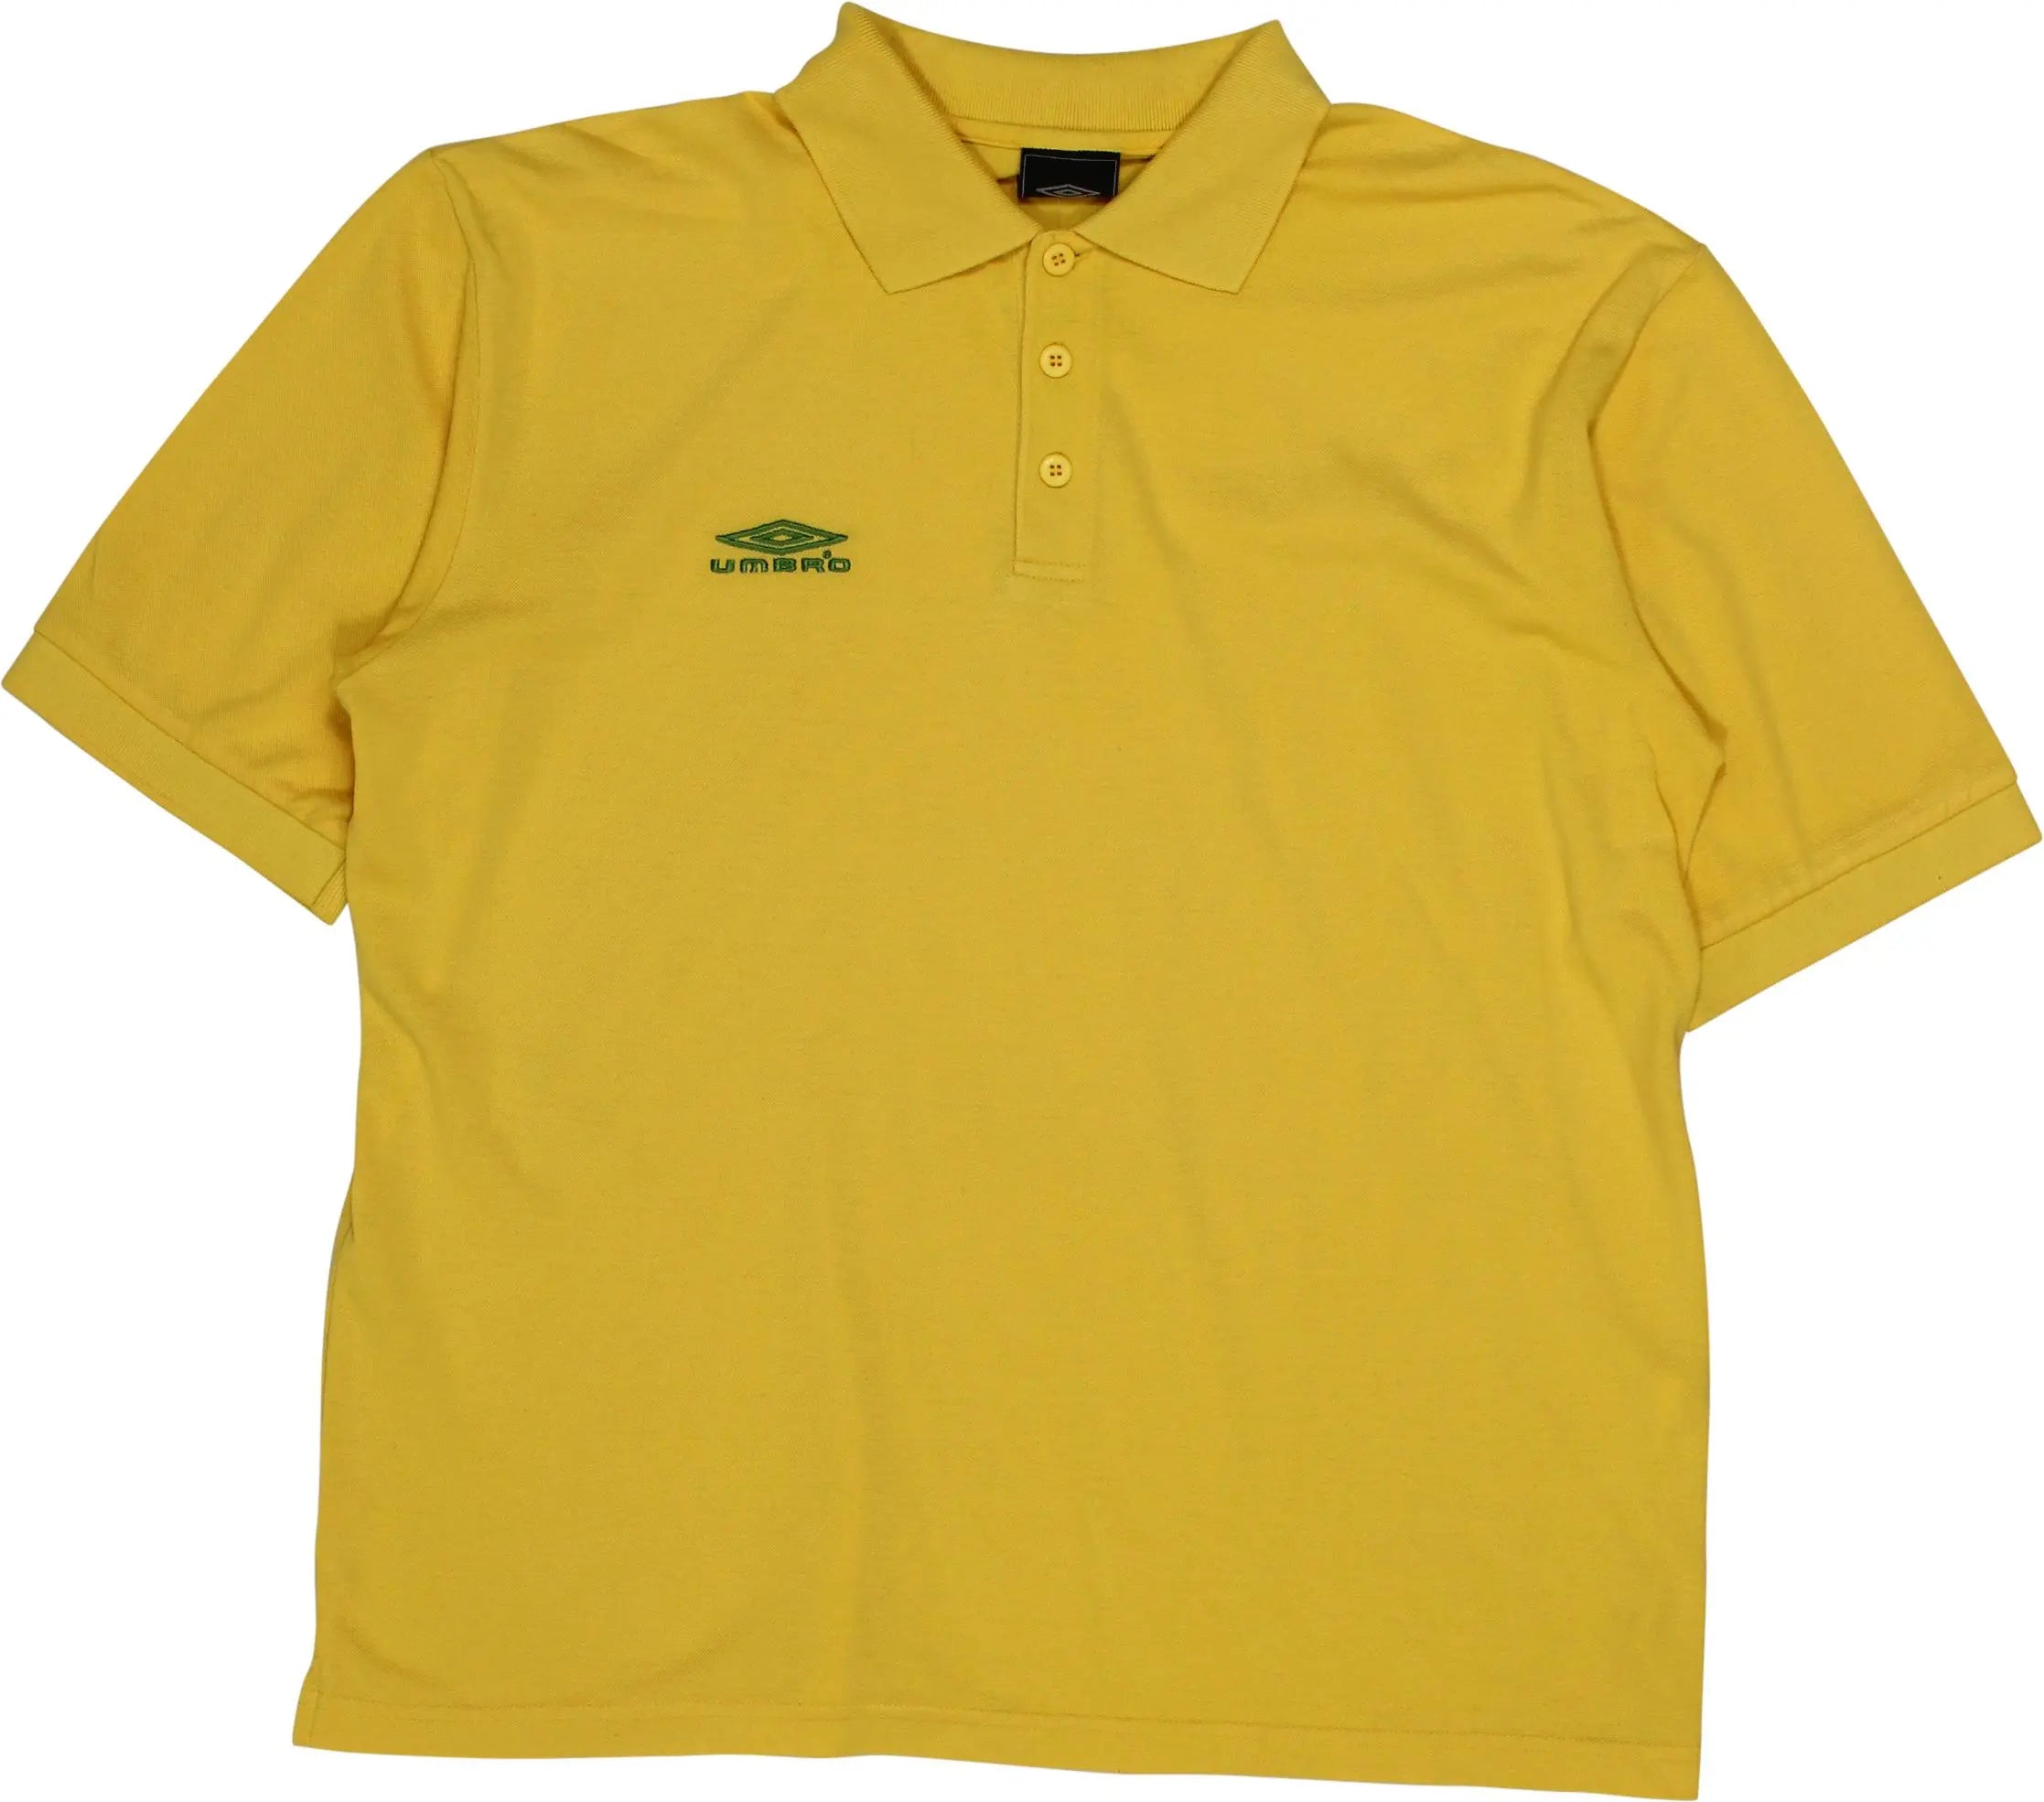 Umbro - Umbro Polo- ThriftTale.com - Vintage and second handclothing